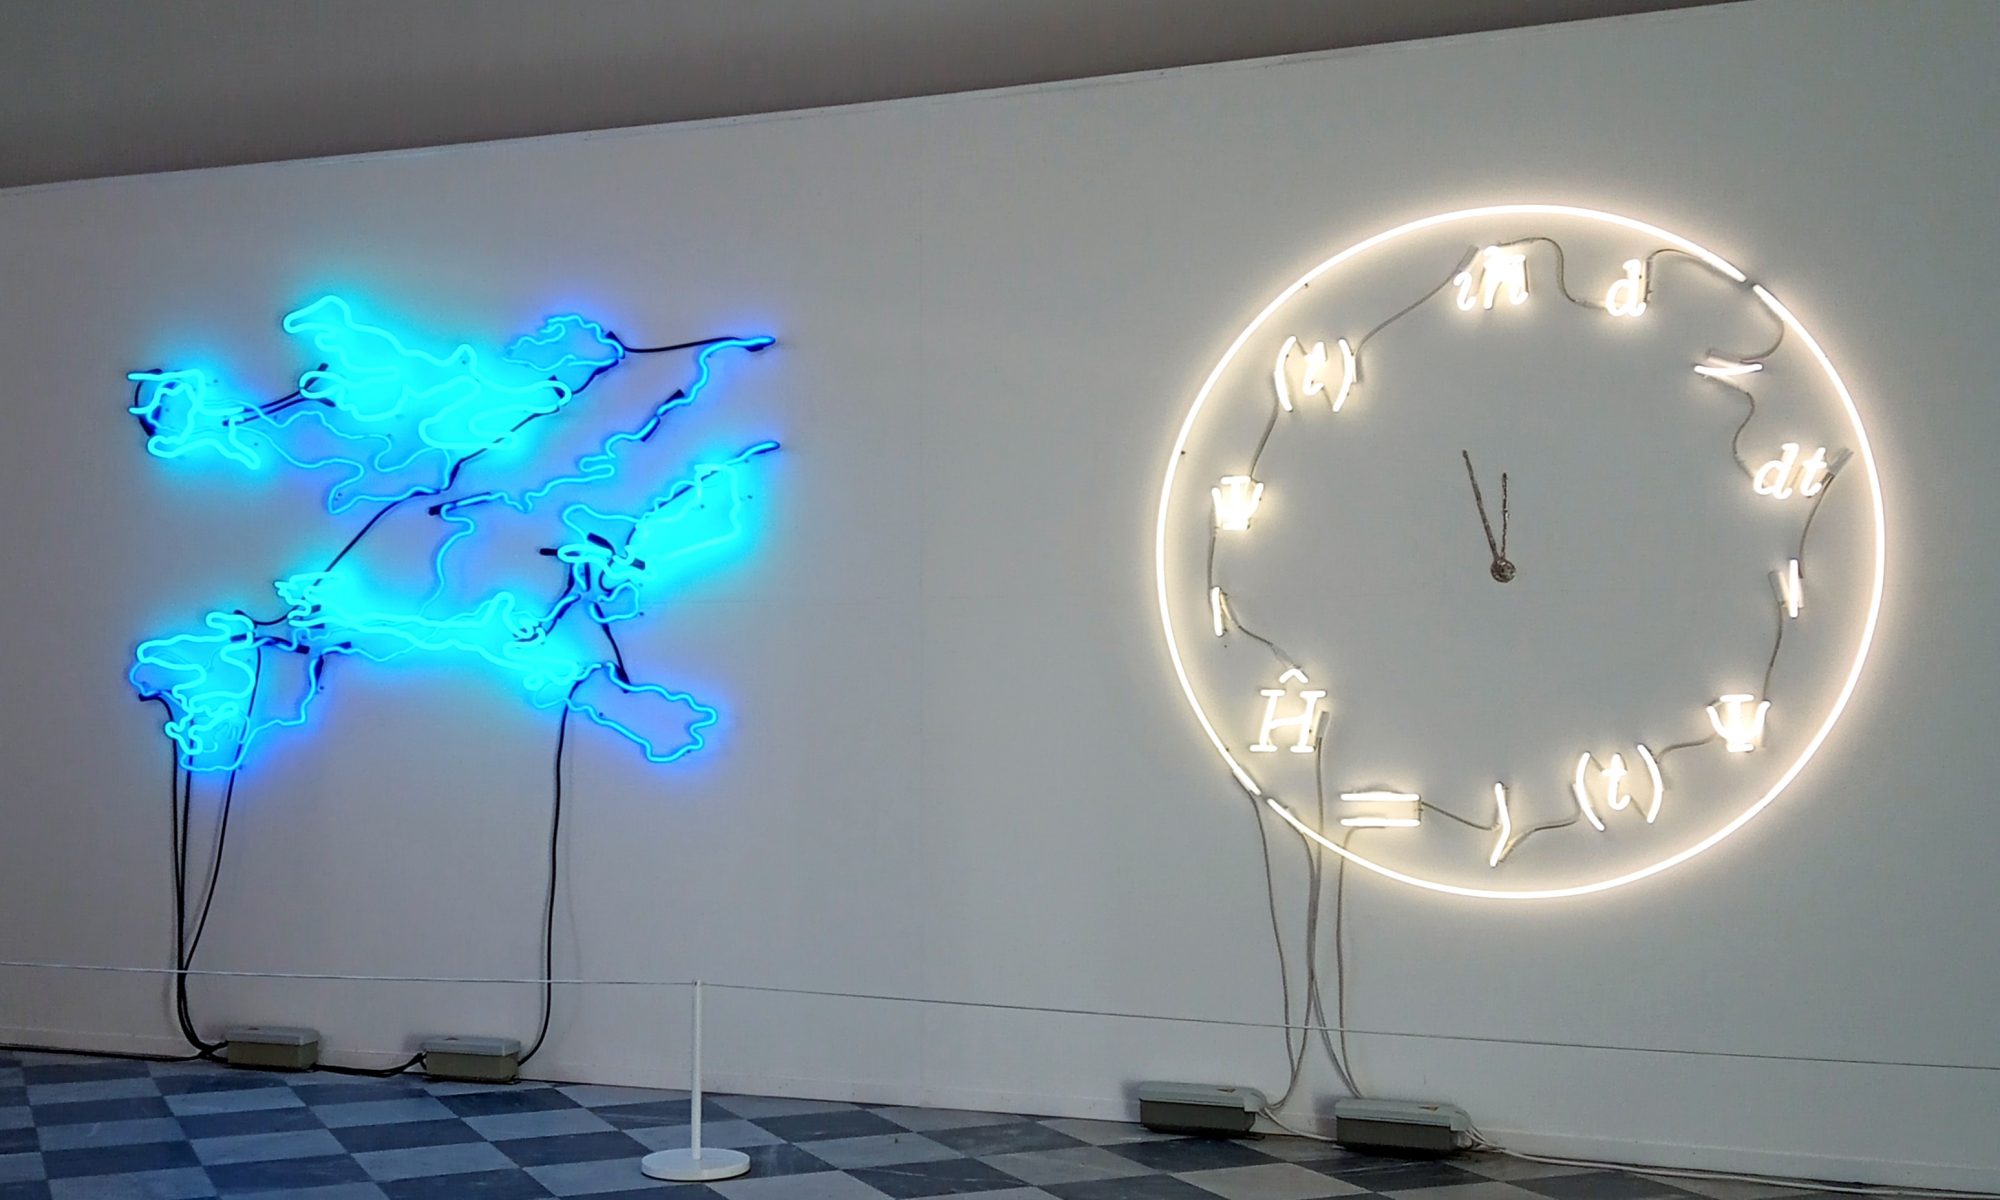 Installation view of Shezad Dawood and RA Walden's neon work for Hybrid futures at Grundy Art Gallery.